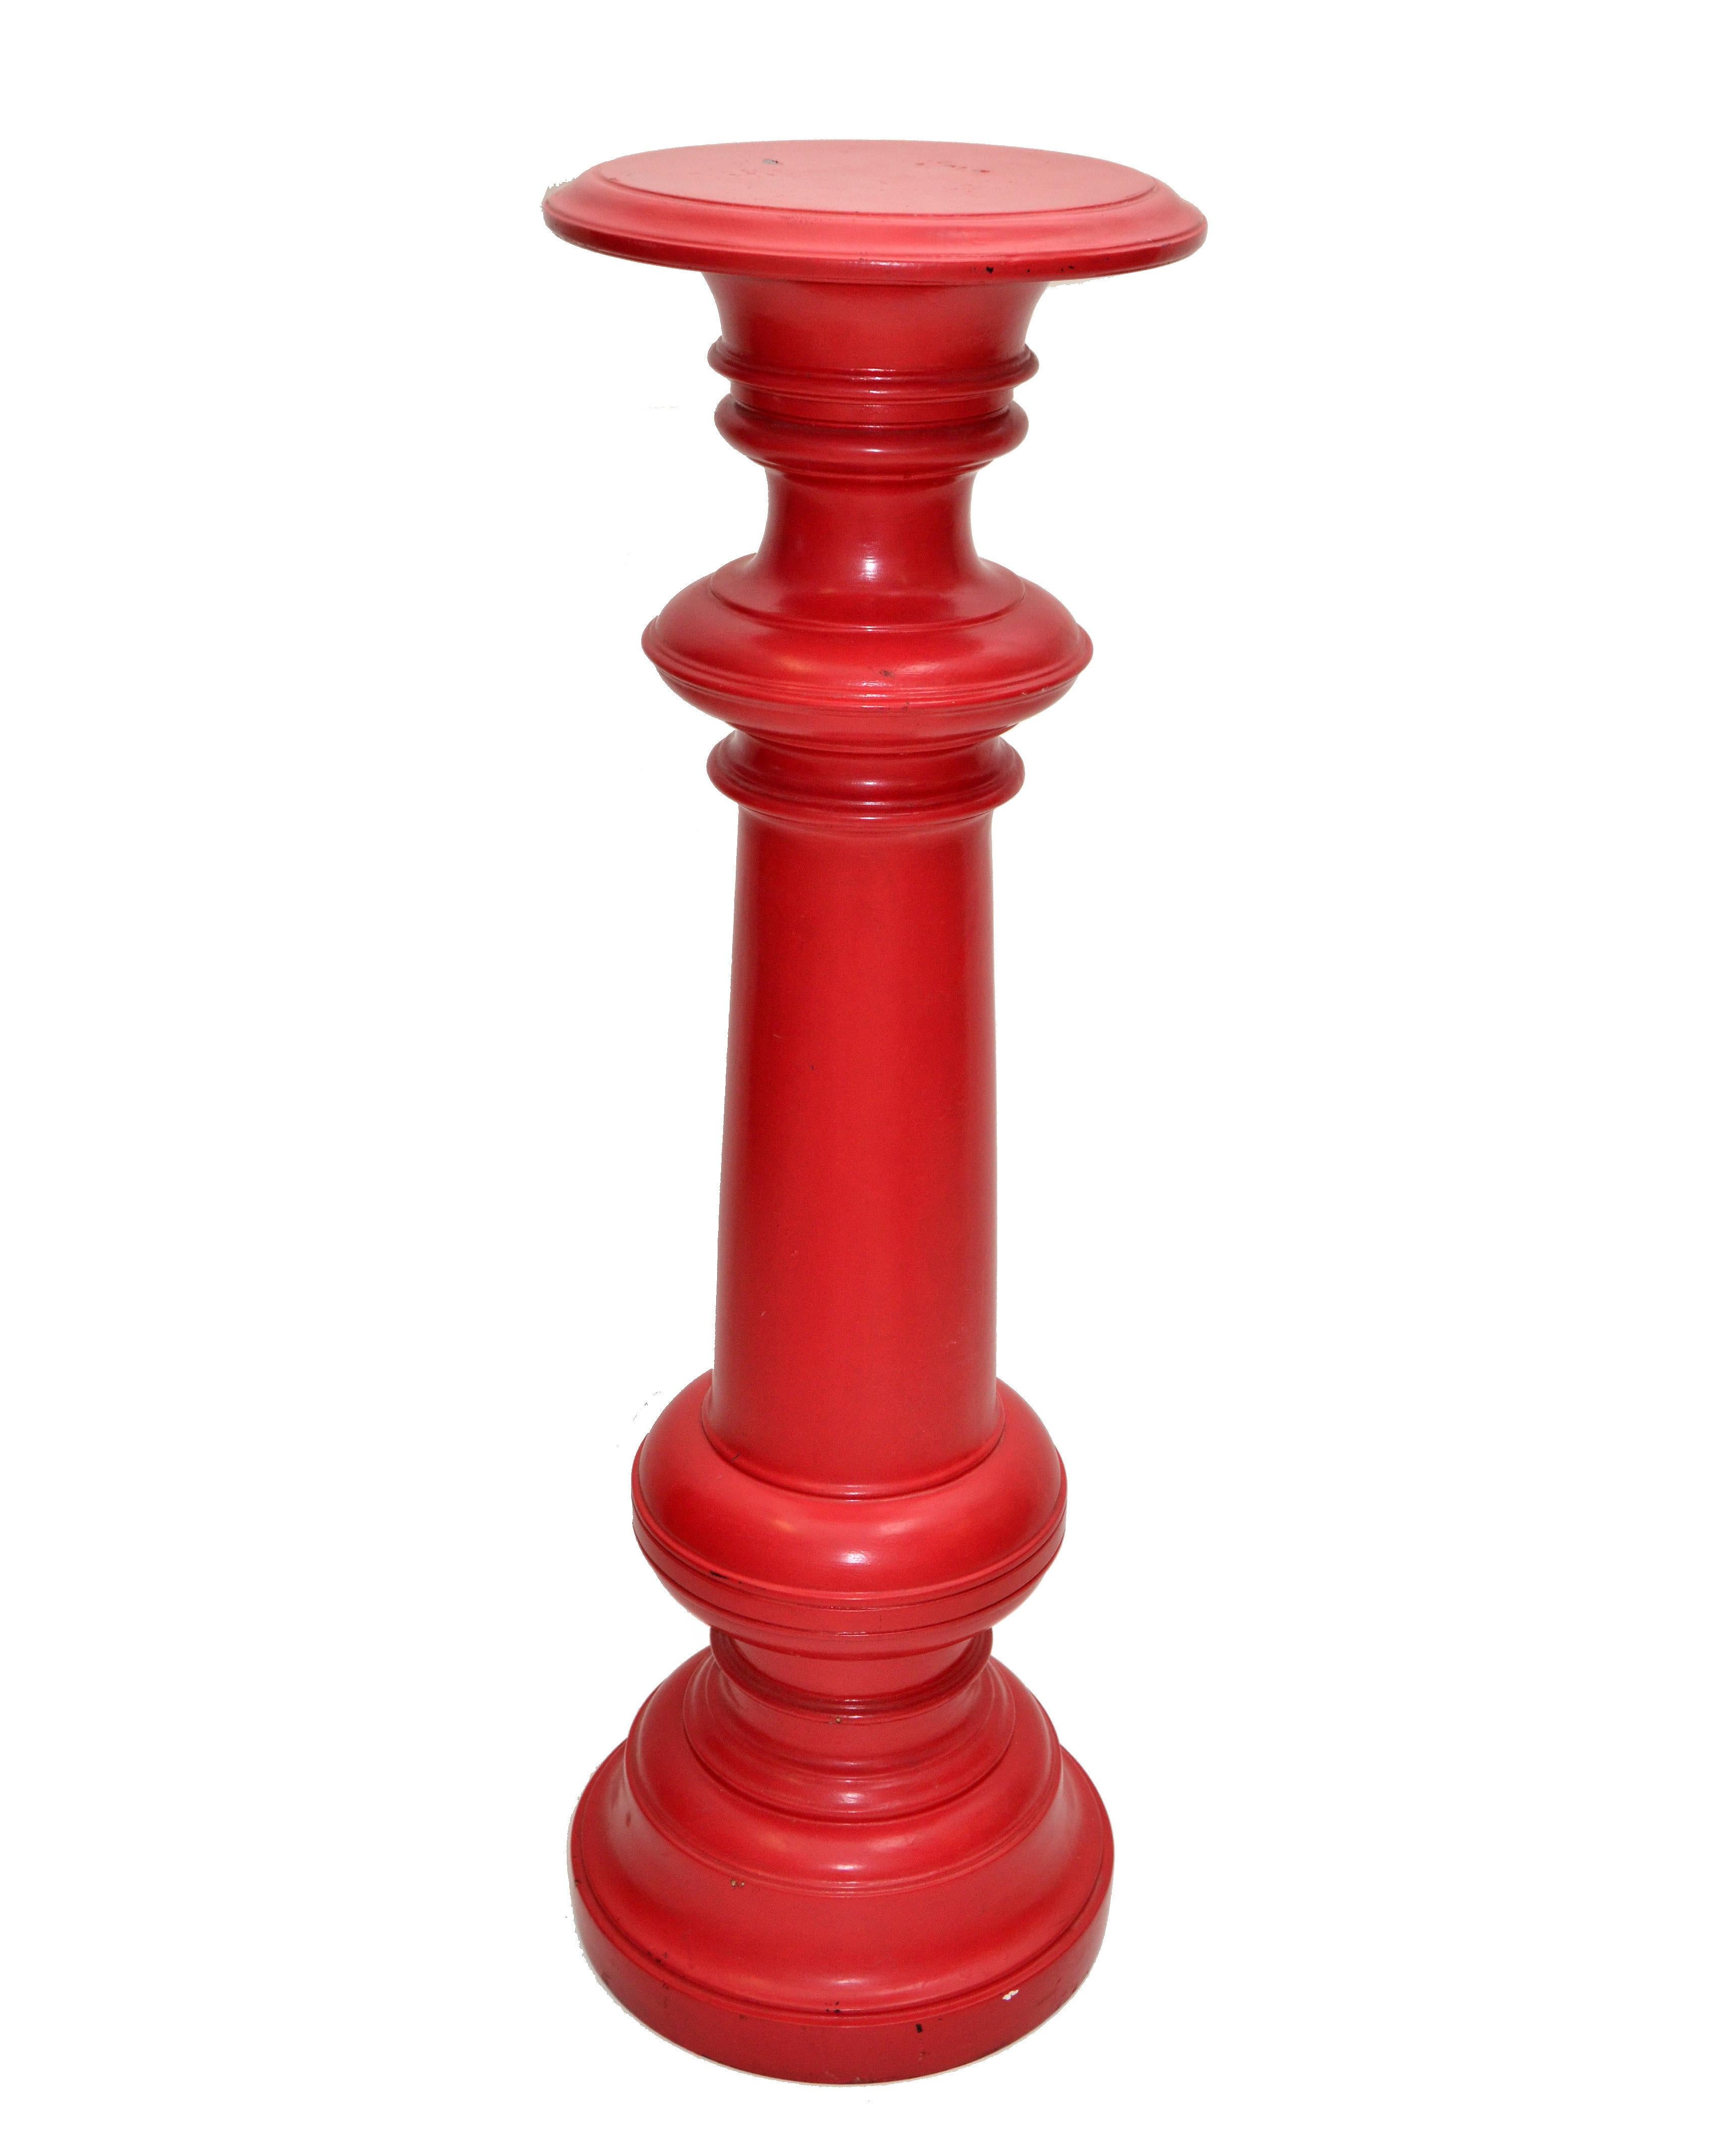 Tall Mid-Century Modern Turned Wood Red Finish Plant Stand Sculpture Pedestal For Sale 4